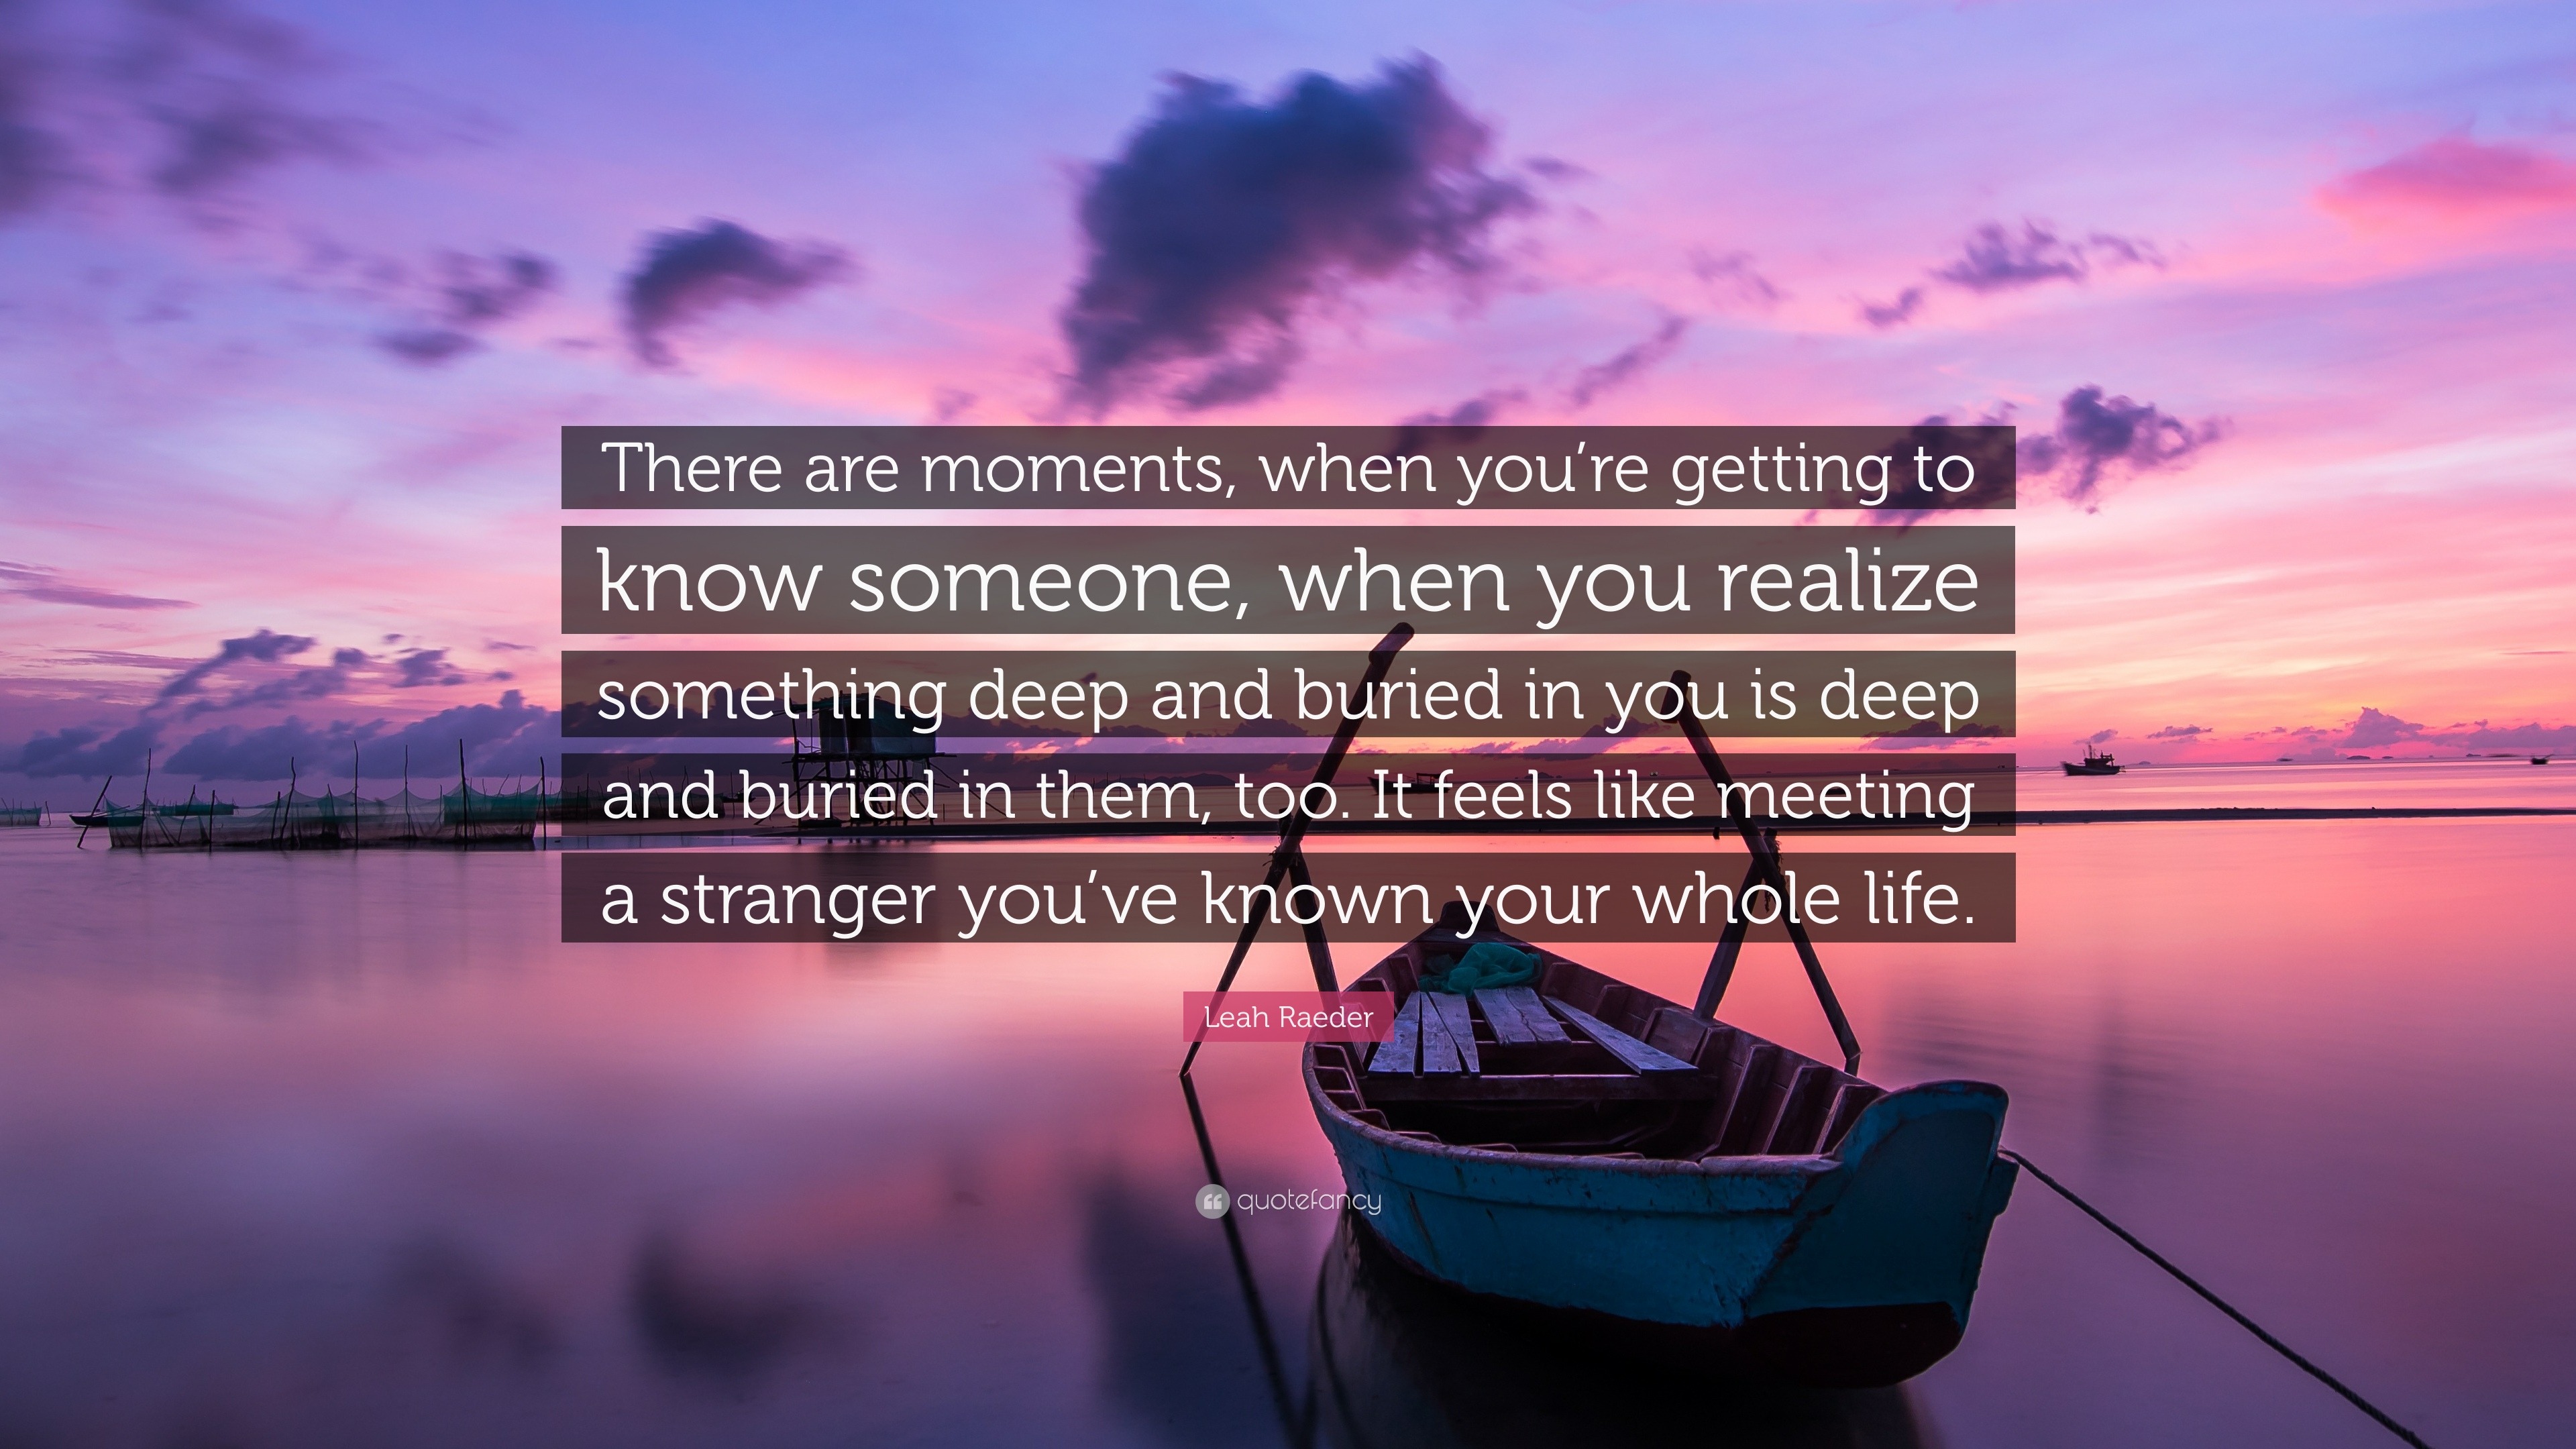 Leah Raeder Quote: “There are moments, when you’re getting to know ...